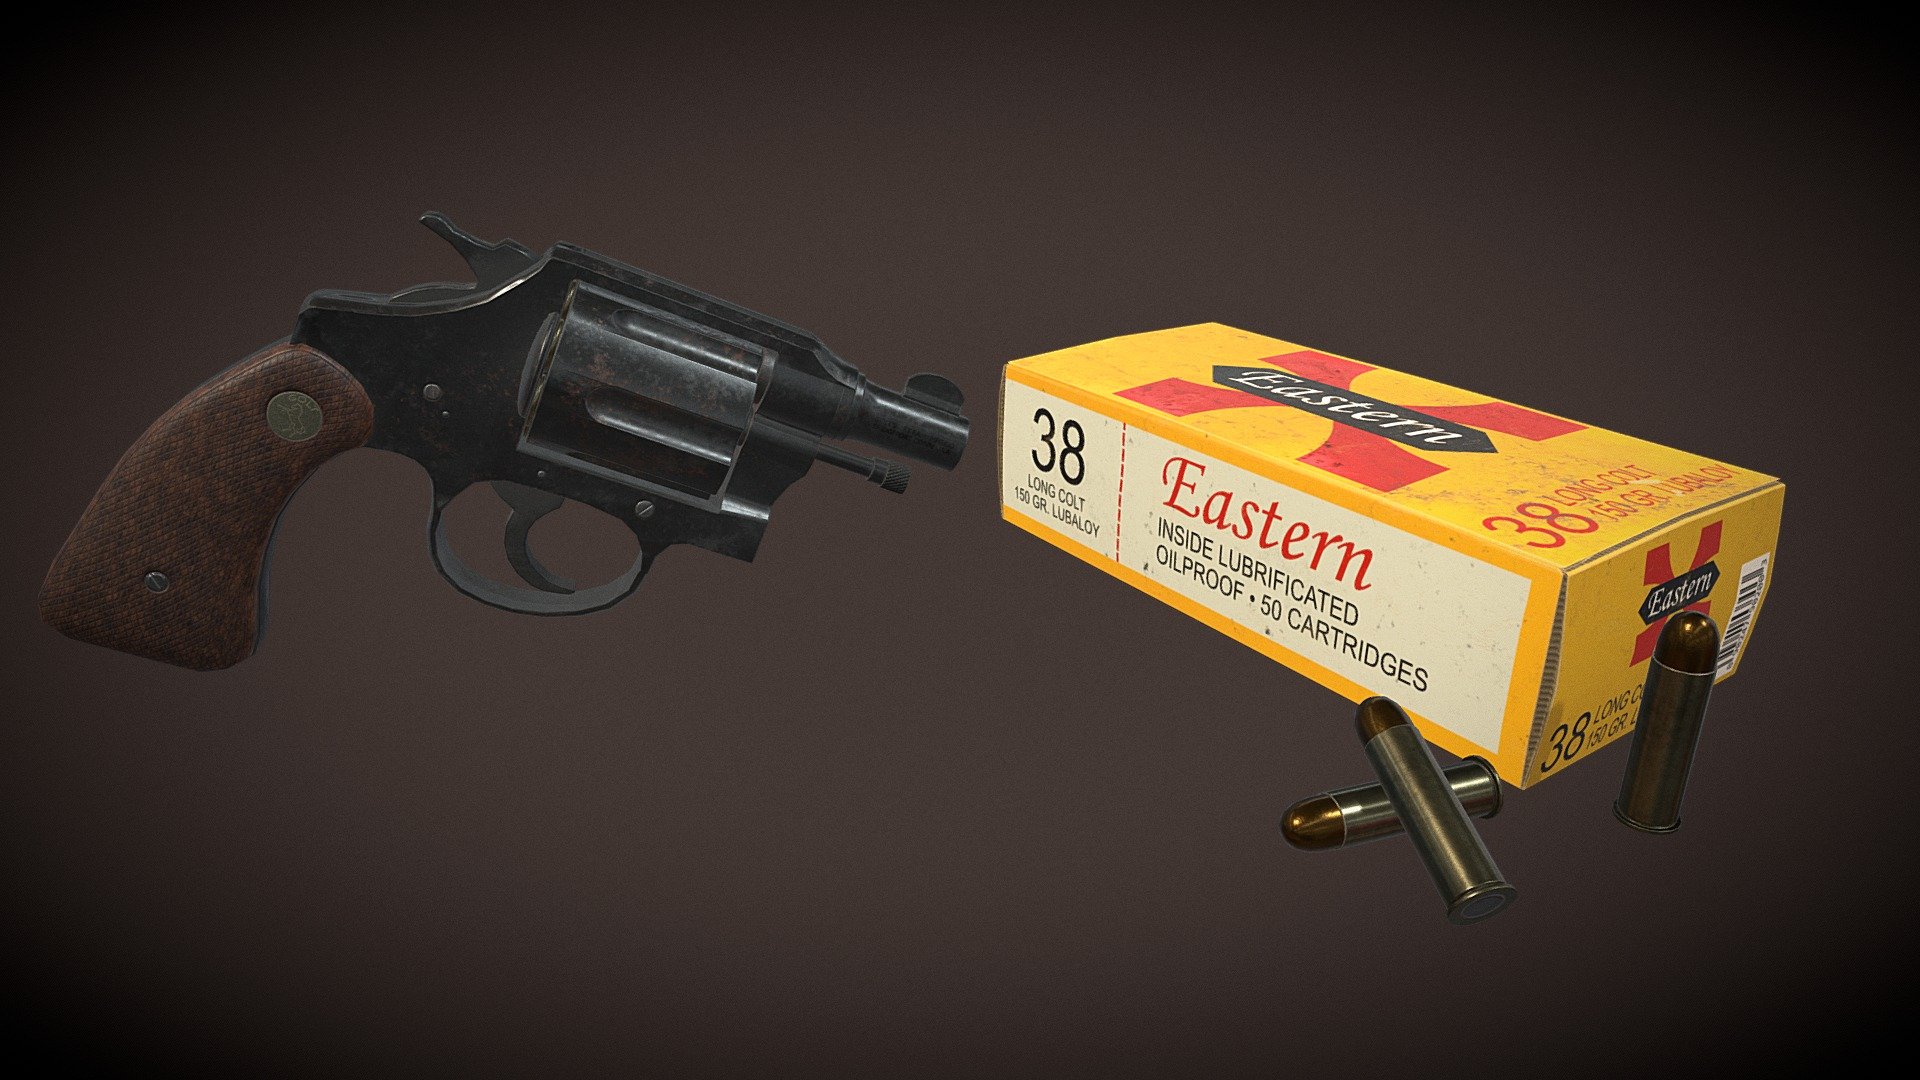 Realistic game-ready asset - .38 pistol and Cartridge Case.
Contains 2k and 4k textures .png, FBX files.

made with Substance Painter and Designer, Maya, Zbrush, Affinity Designer.

ps: I may provide another file formats if asked. Thanks! - 38 Pistol and Cartridge Case - Buy Royalty Free 3D model by oisougabo 3d model